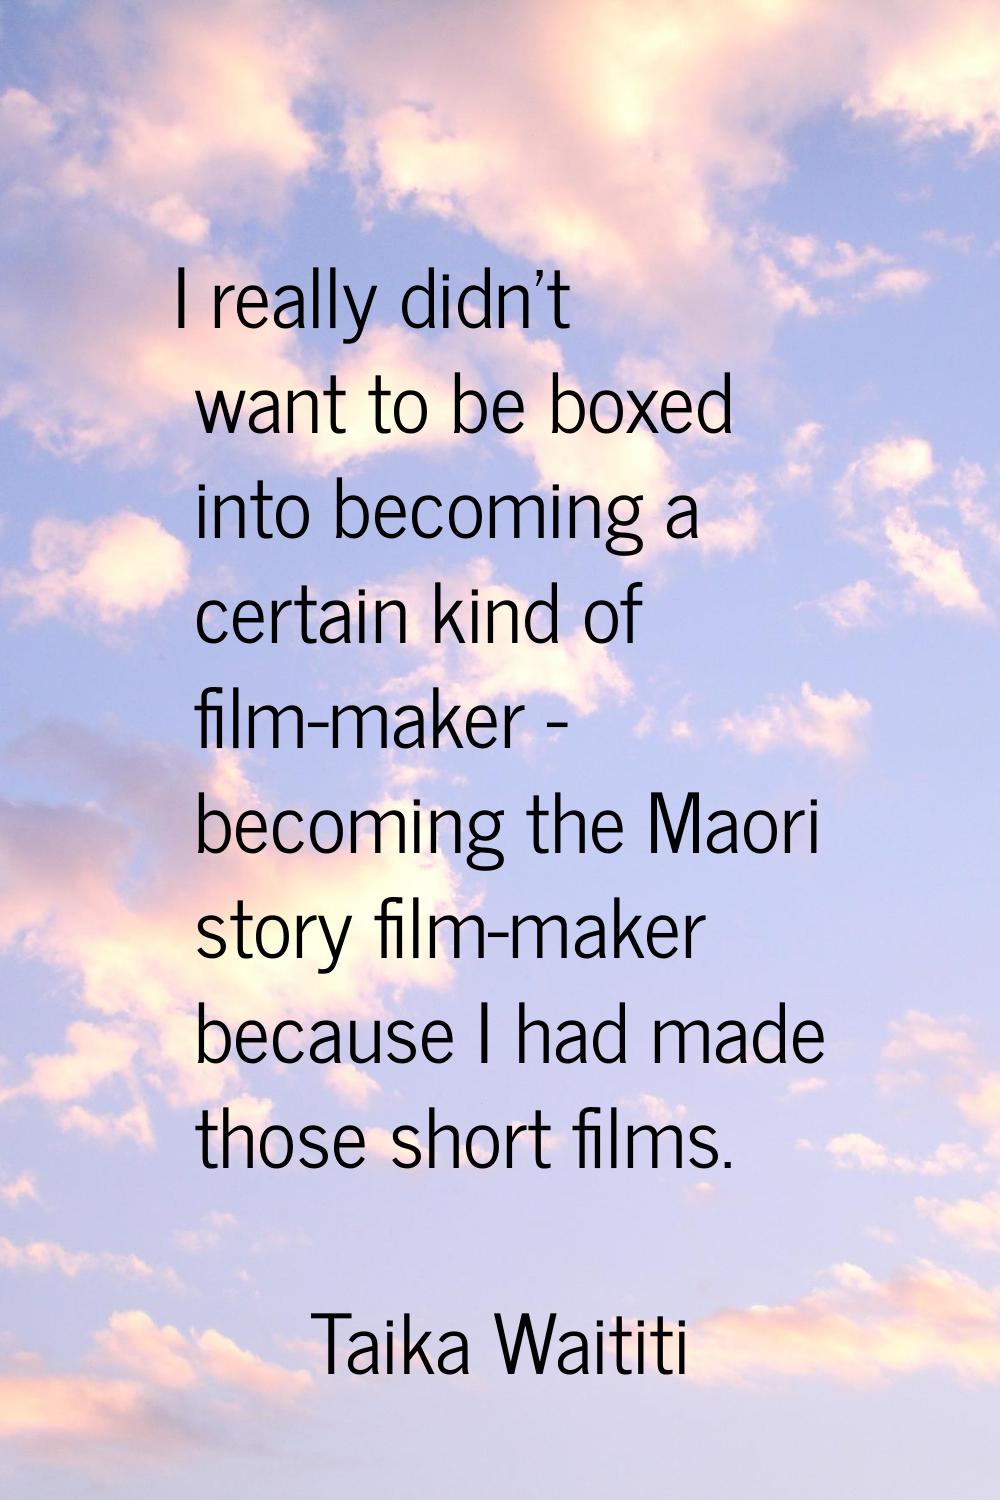 I really didn't want to be boxed into becoming a certain kind of film-maker - becoming the Maori st